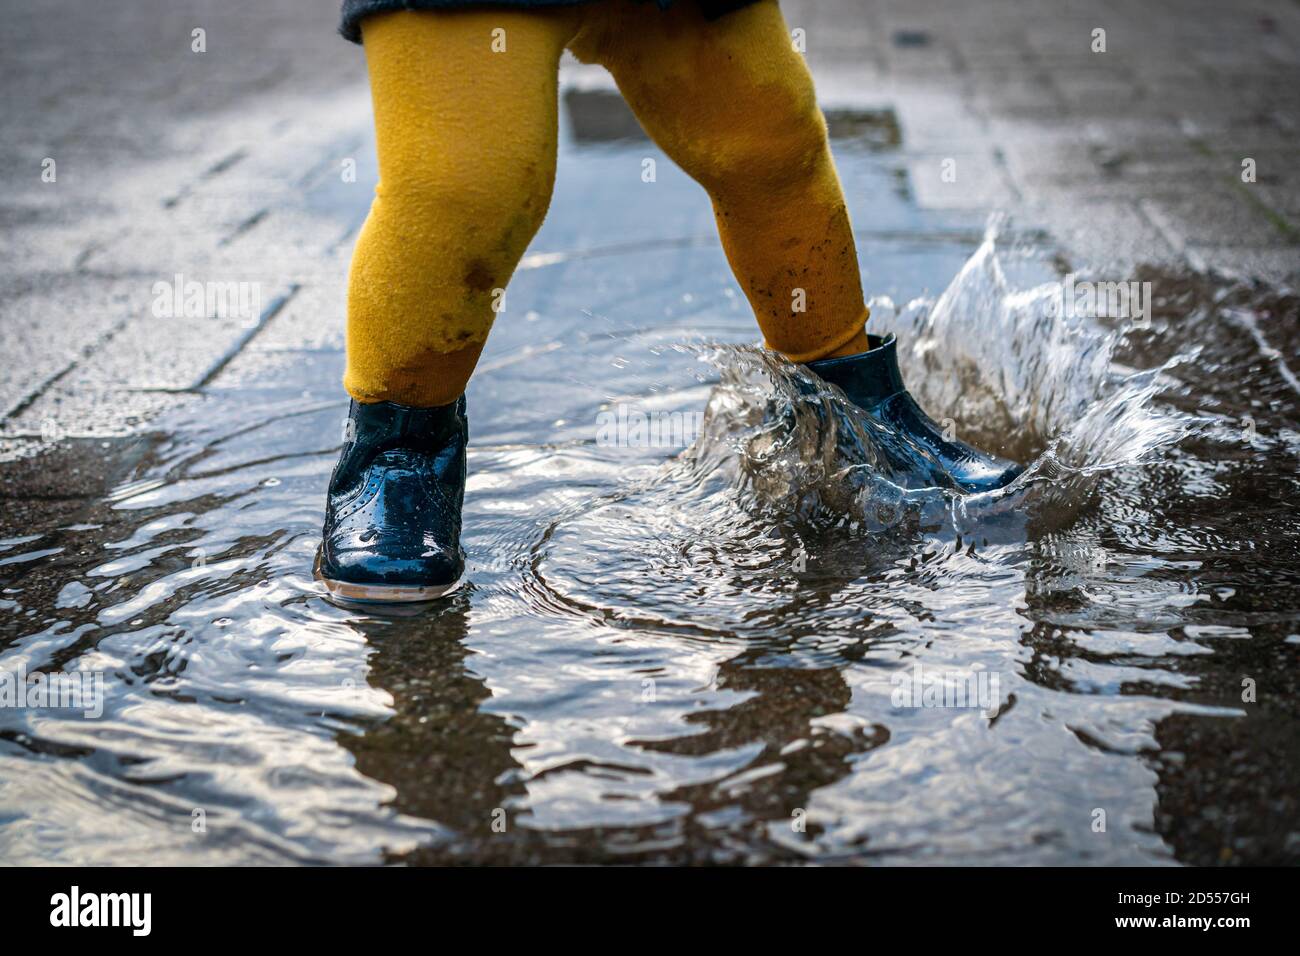 October 7th, 2020, Trebbin, a little girl with rubber shoes and yellow tights jumps around in a puddle and has a lot of fun. | usage worldwide Stock Photo